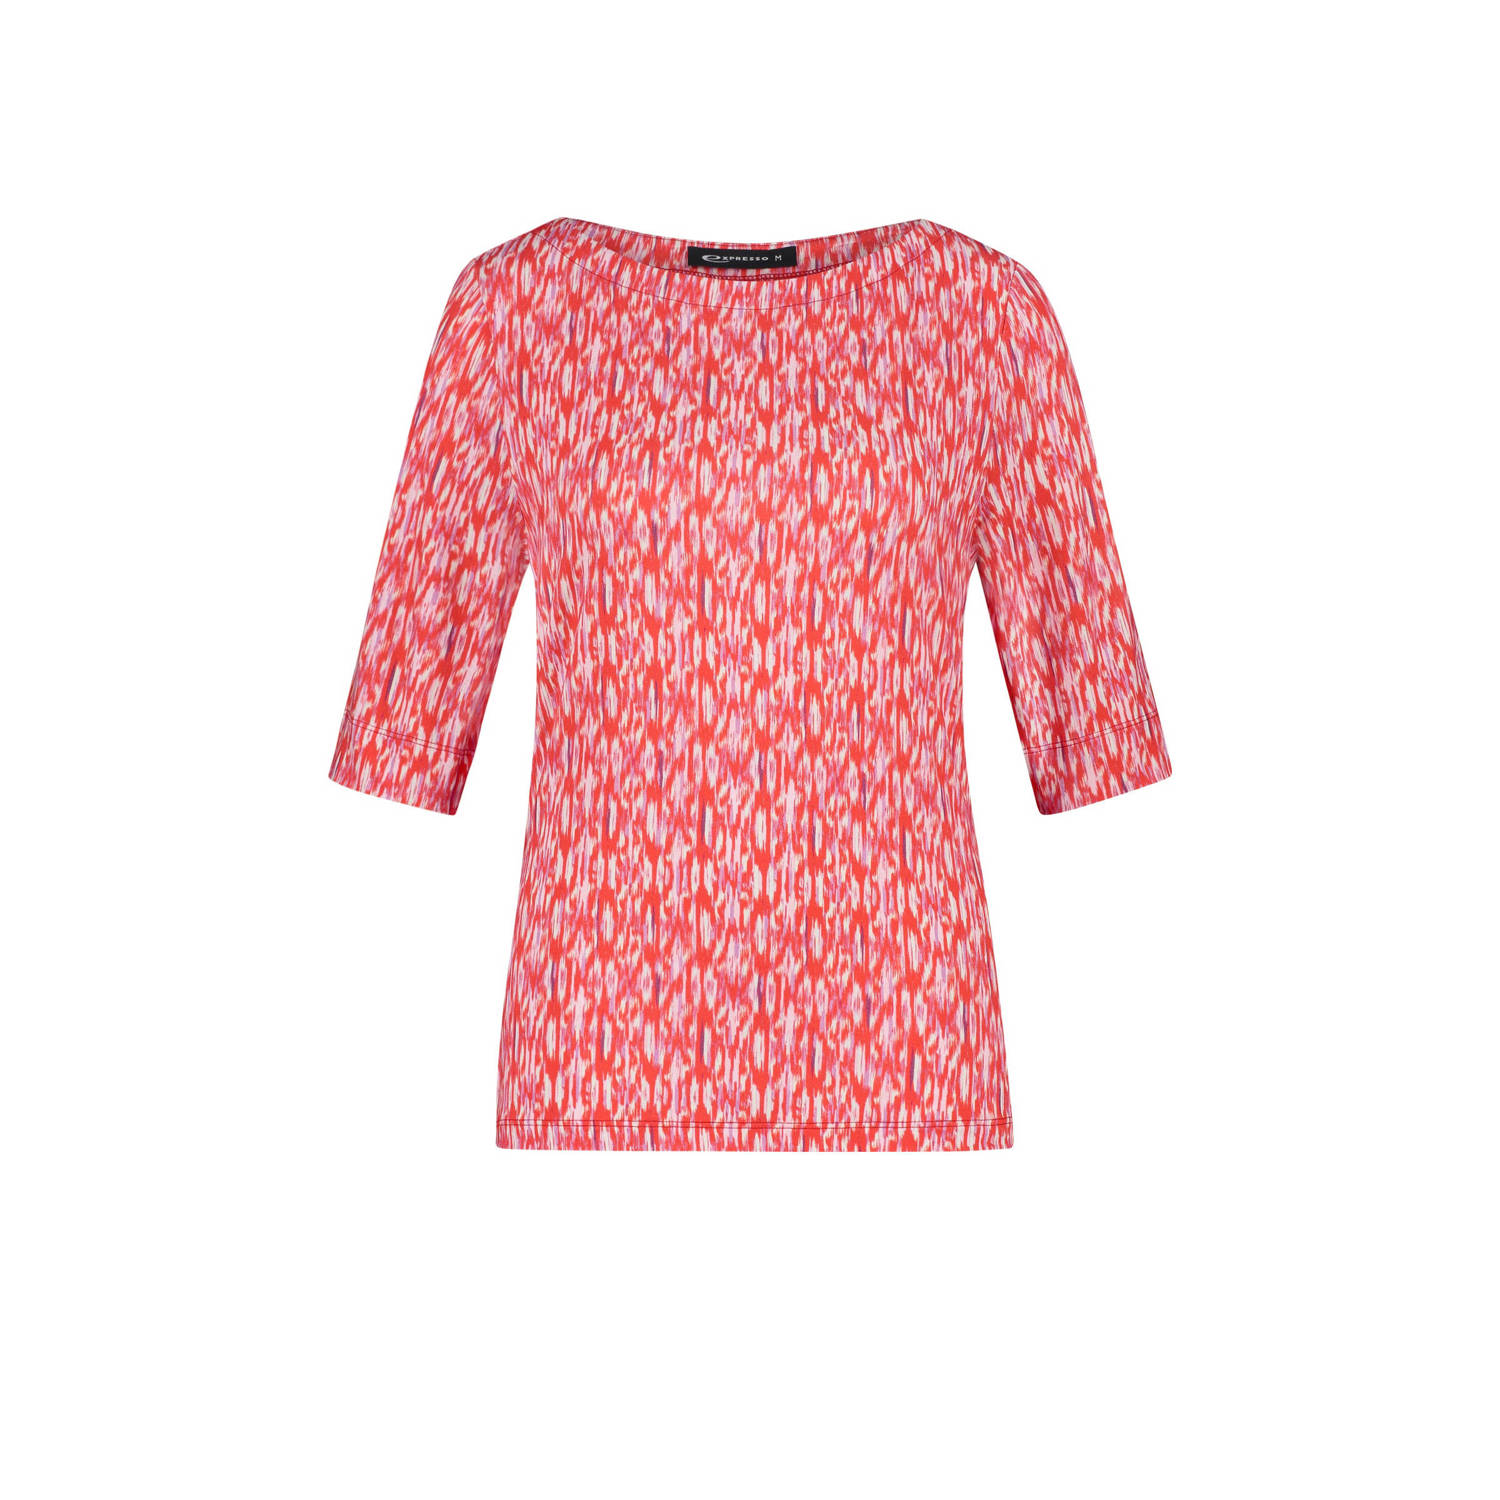 Expresso top met all over print rood wit